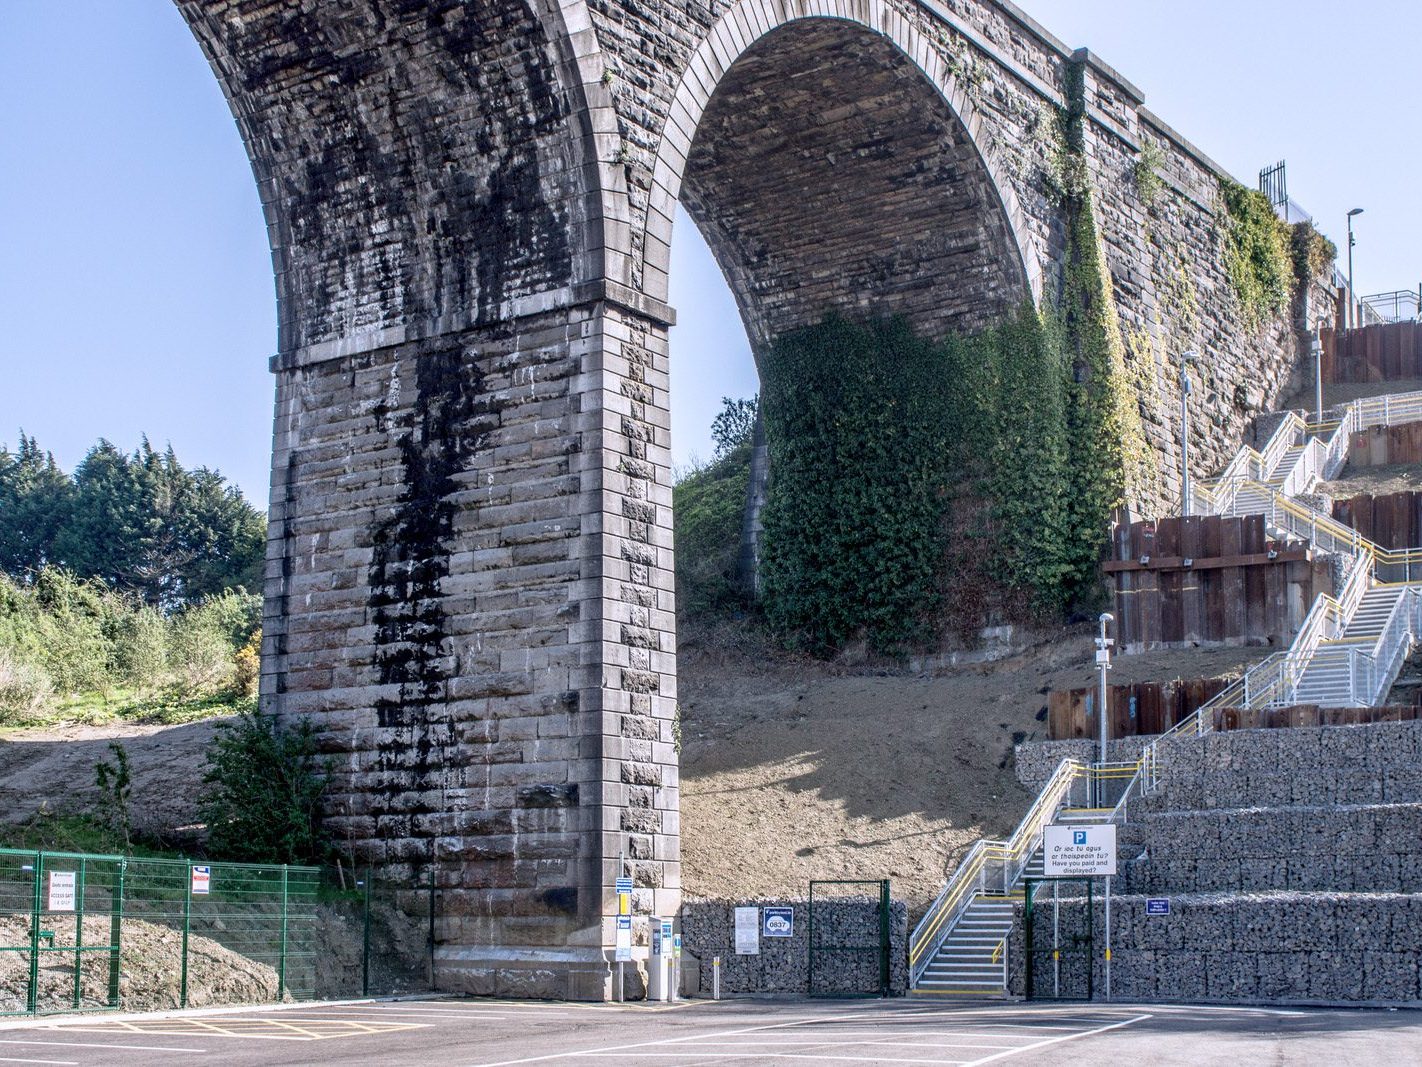 THE BOYNE VIADUCT AS IT WAS IN 2012 [RESTORATION WORK WAS UNDERWAY AT THE TIME]-224198-1